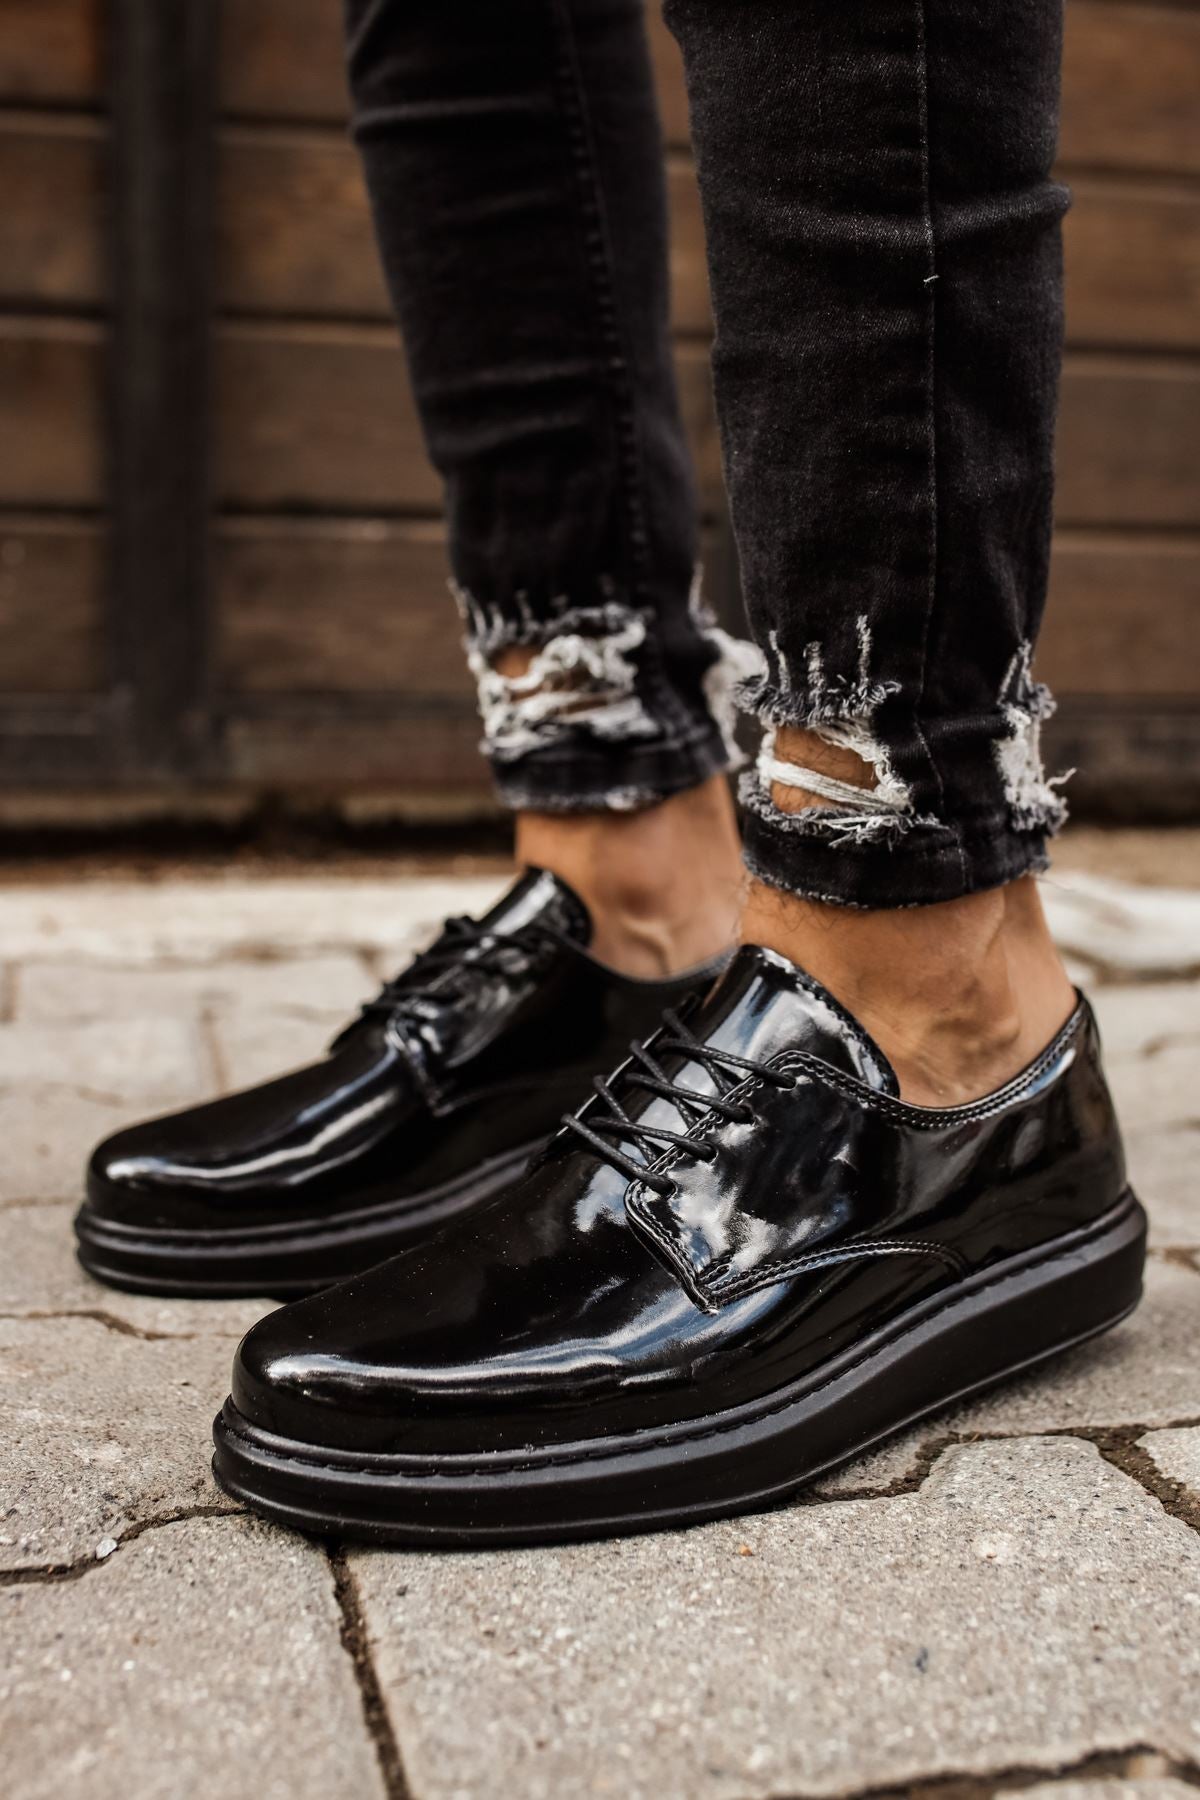 CH003 Men's Full Black Patent Leather Casual Classic Sneaker Shoes - STREETMODE™